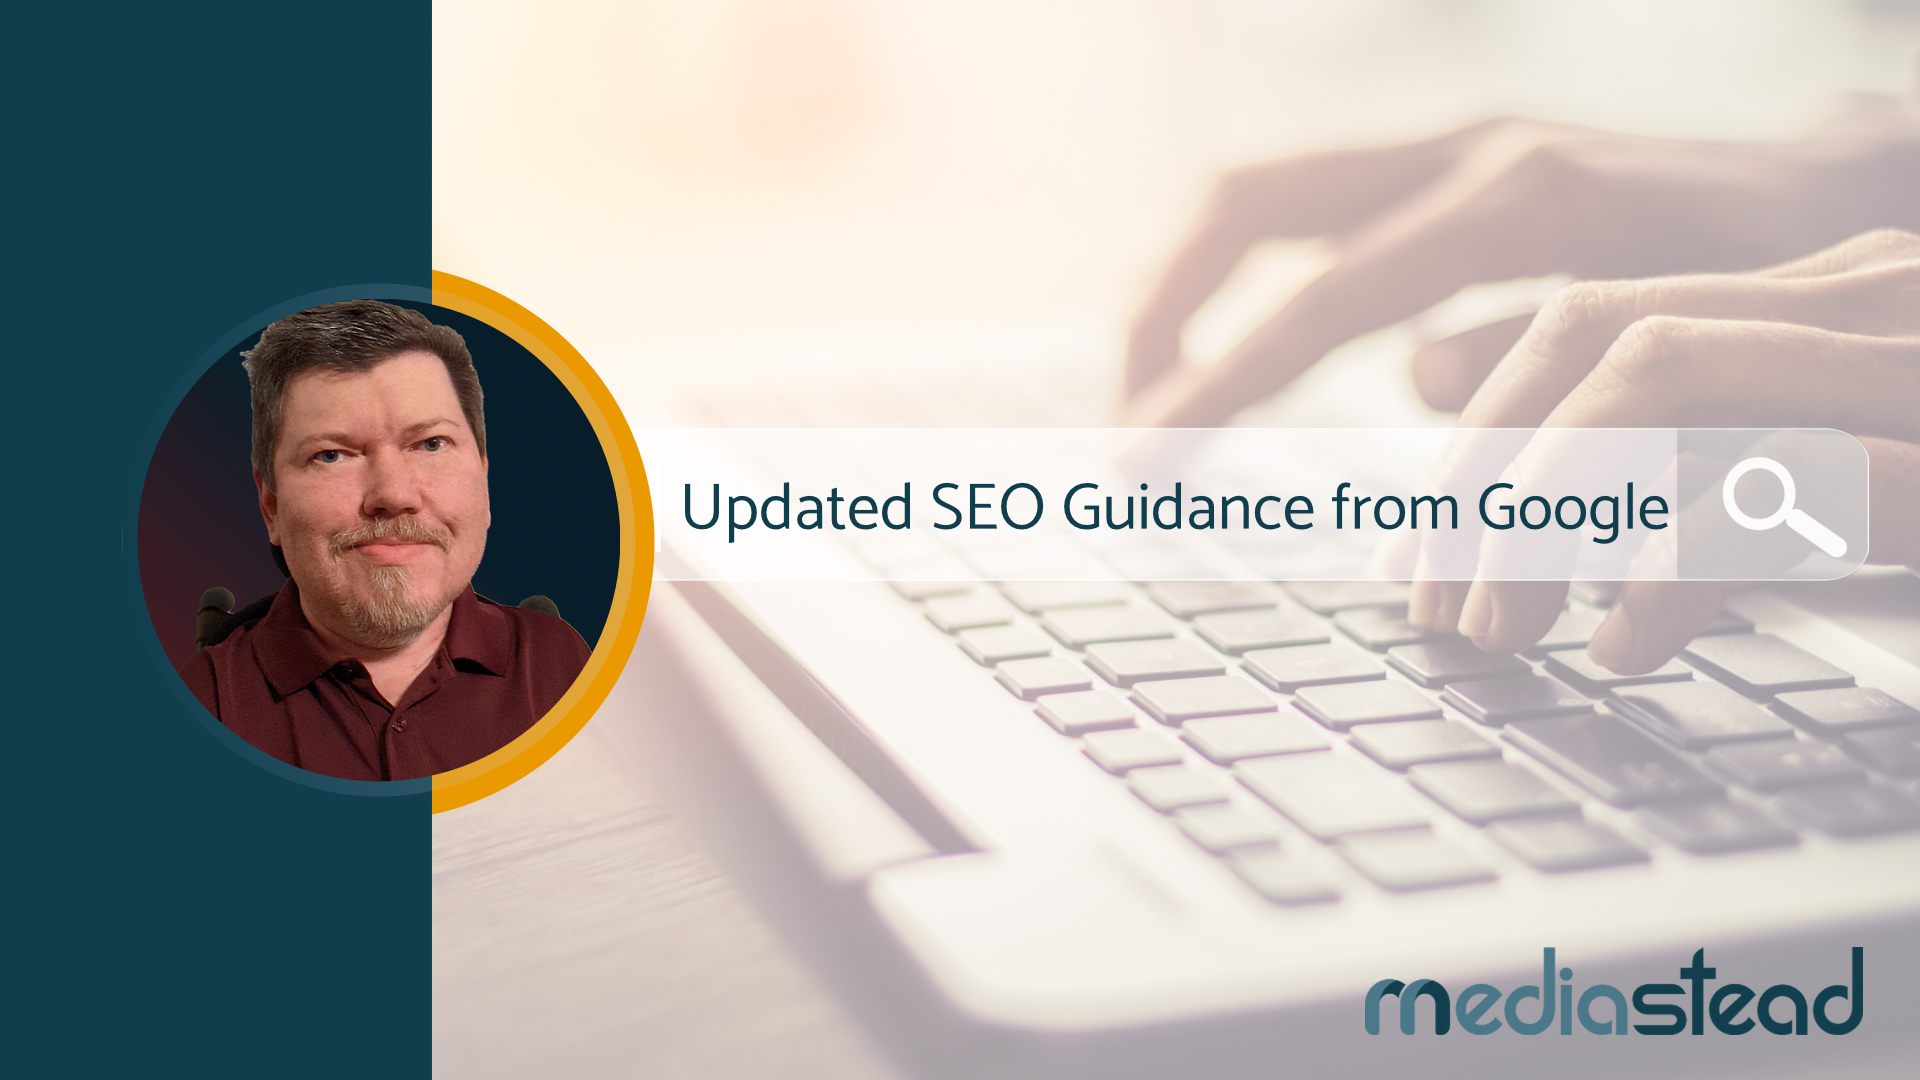 Photo of the author, Jason Tweed, with a background featuring fingers typing on a keyboard with the title "Updated SEO guidance from Google"